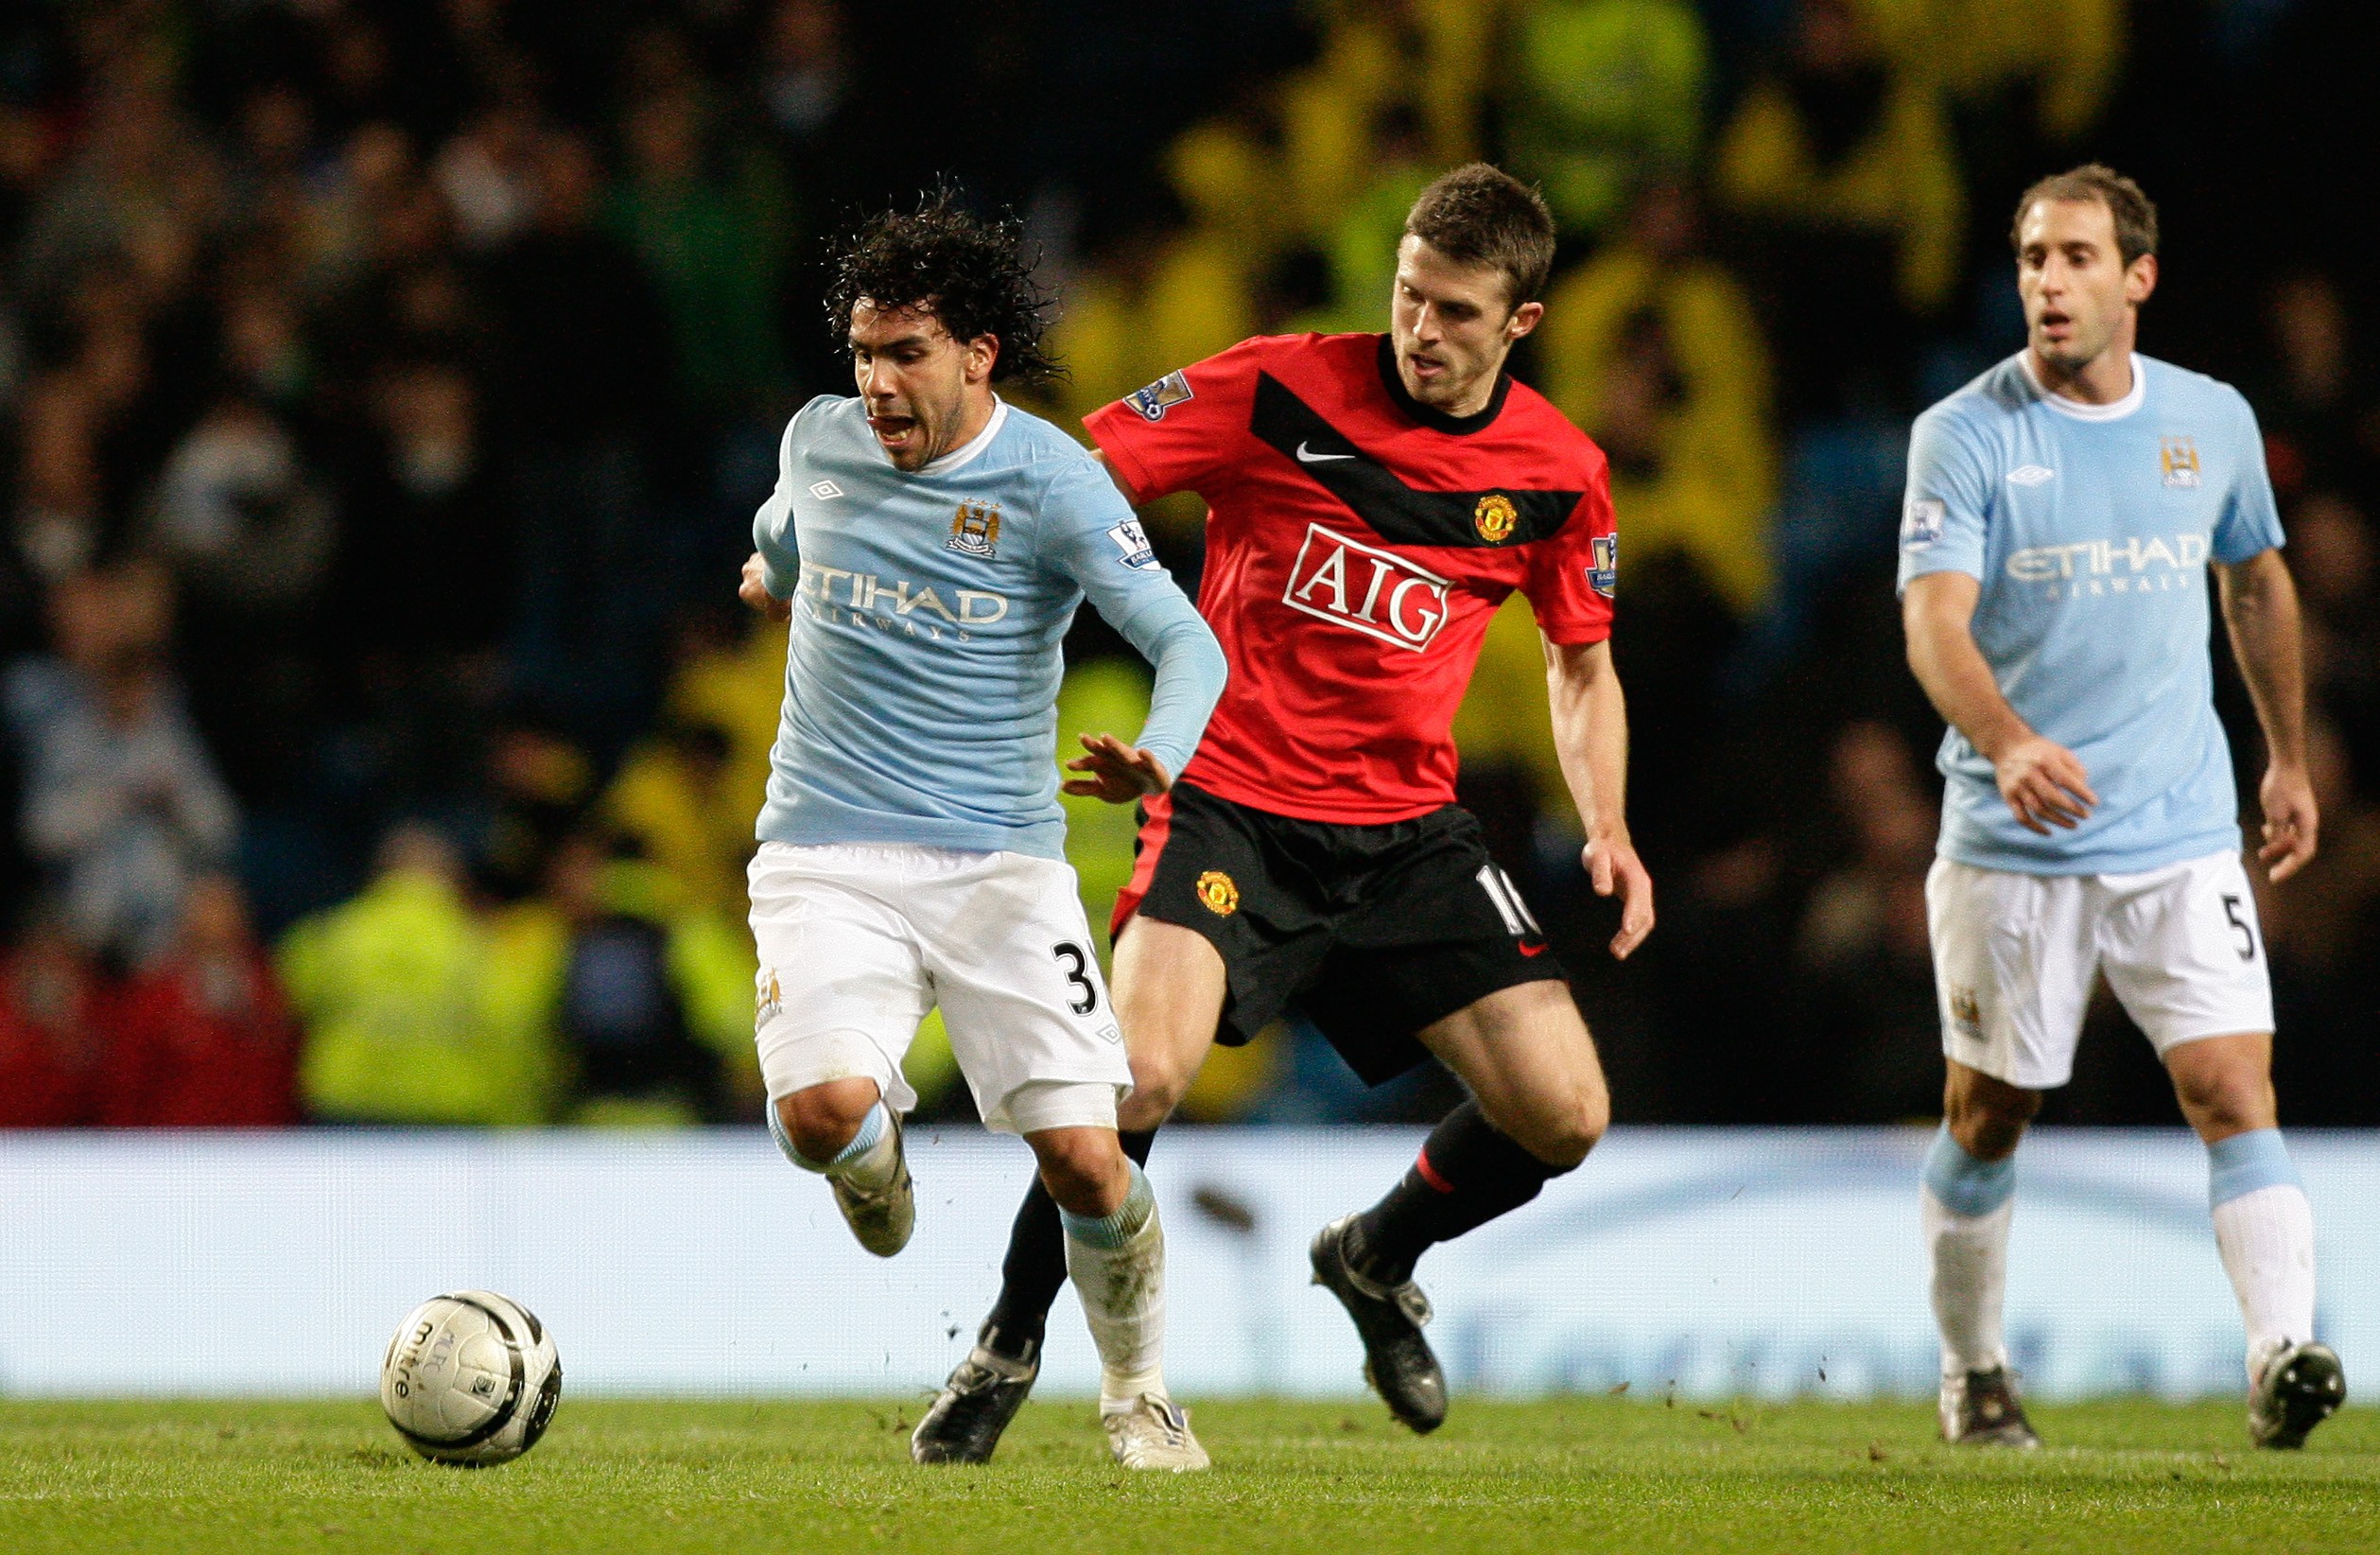 City, United, Manchester, Carling Cup, Carlos Tevez